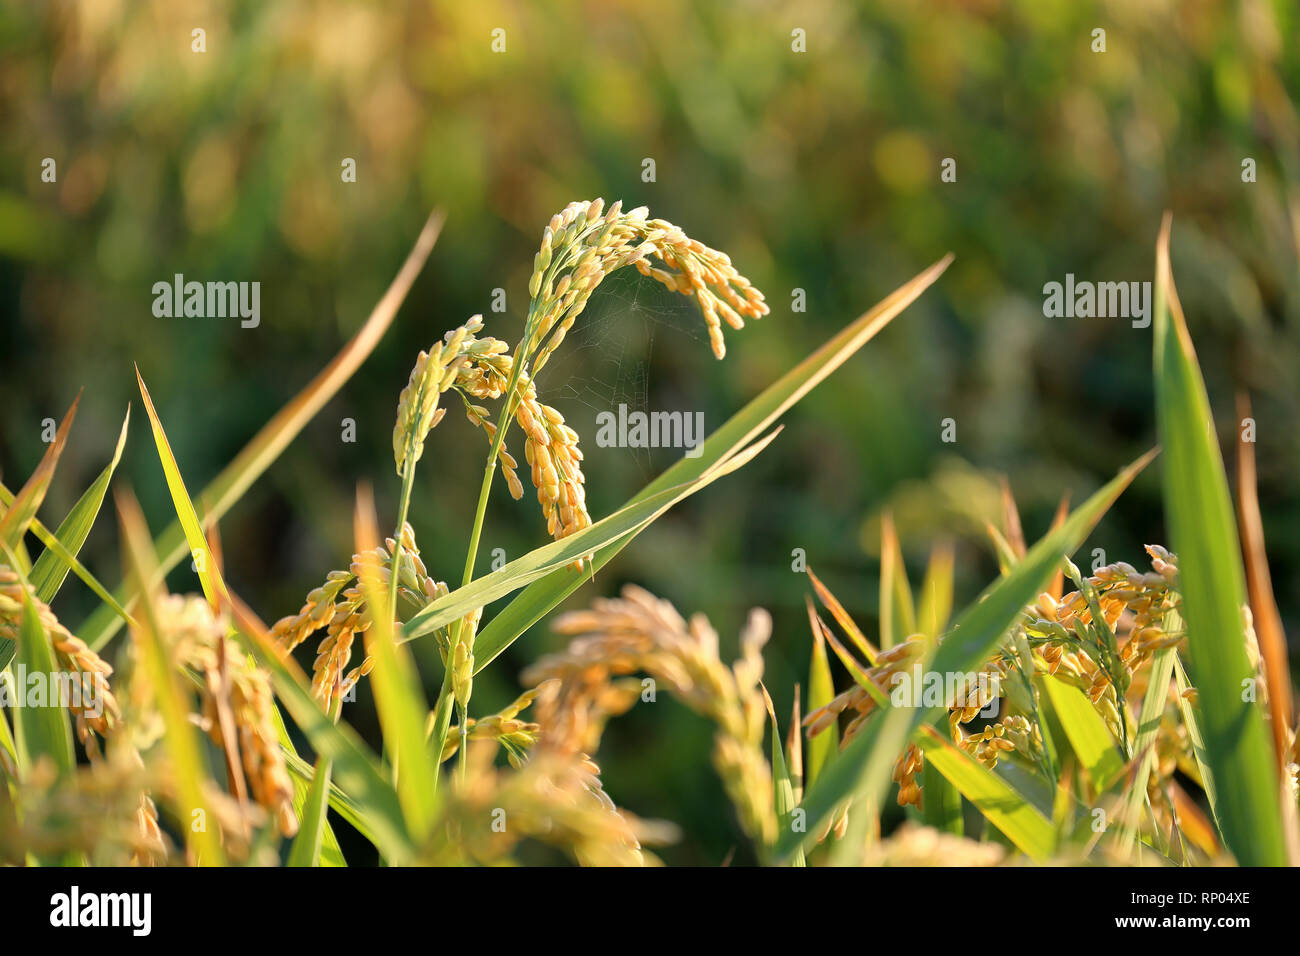 Rice ears in a paddy field, full frame Stock Photo